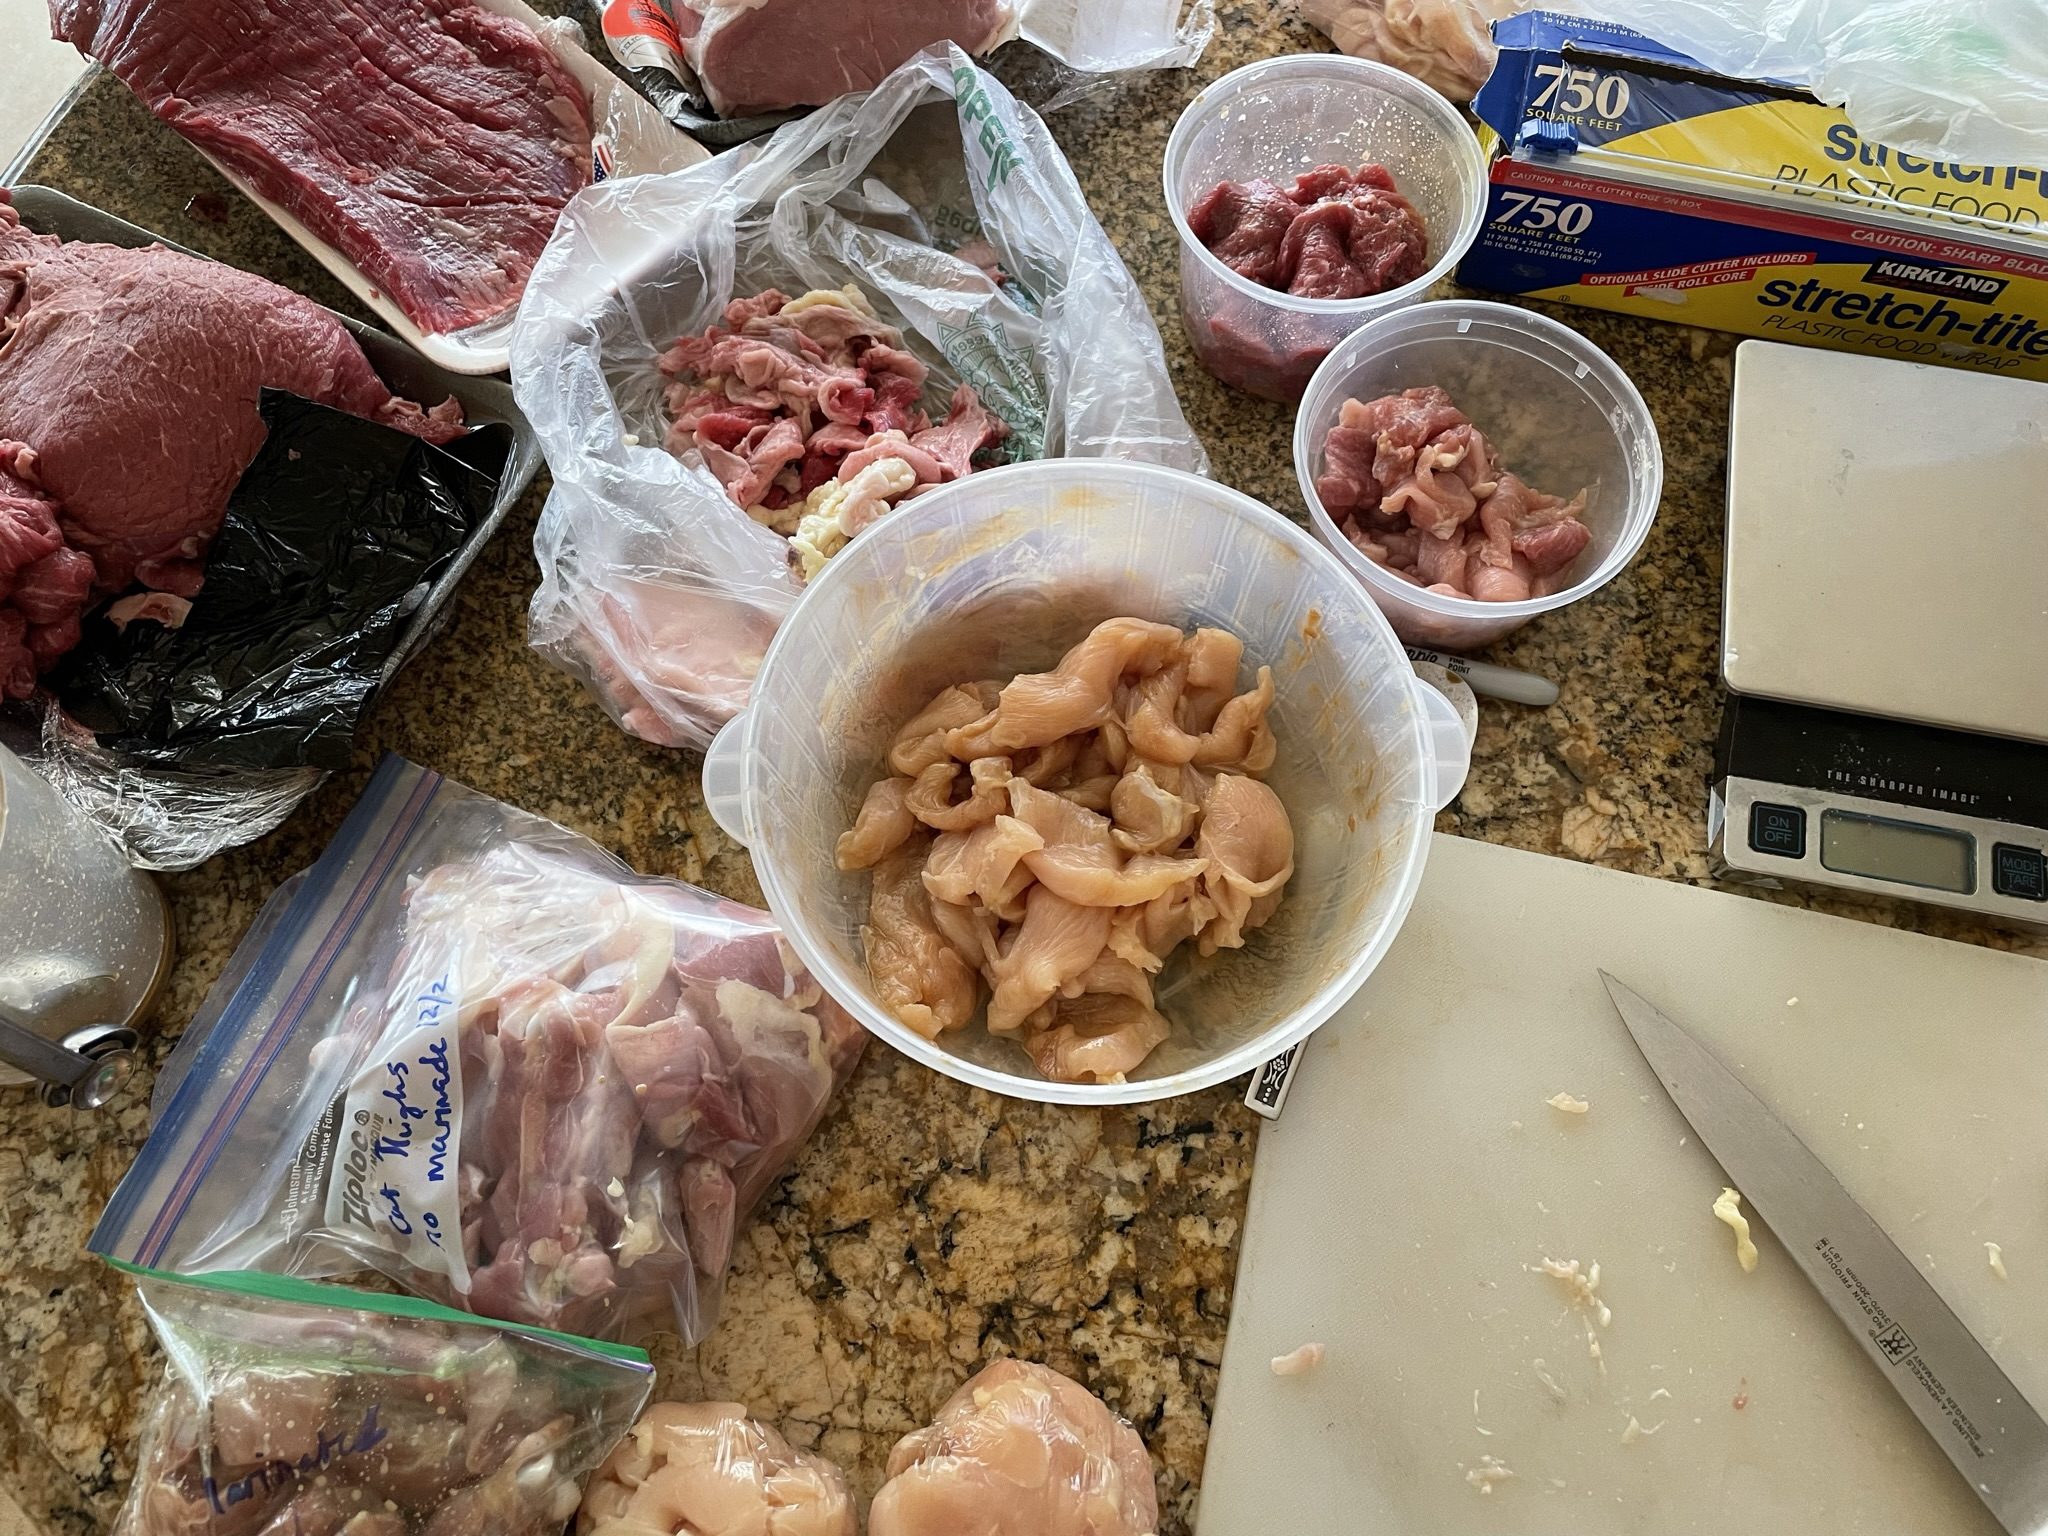 Selecting and cutting meat for stir fry